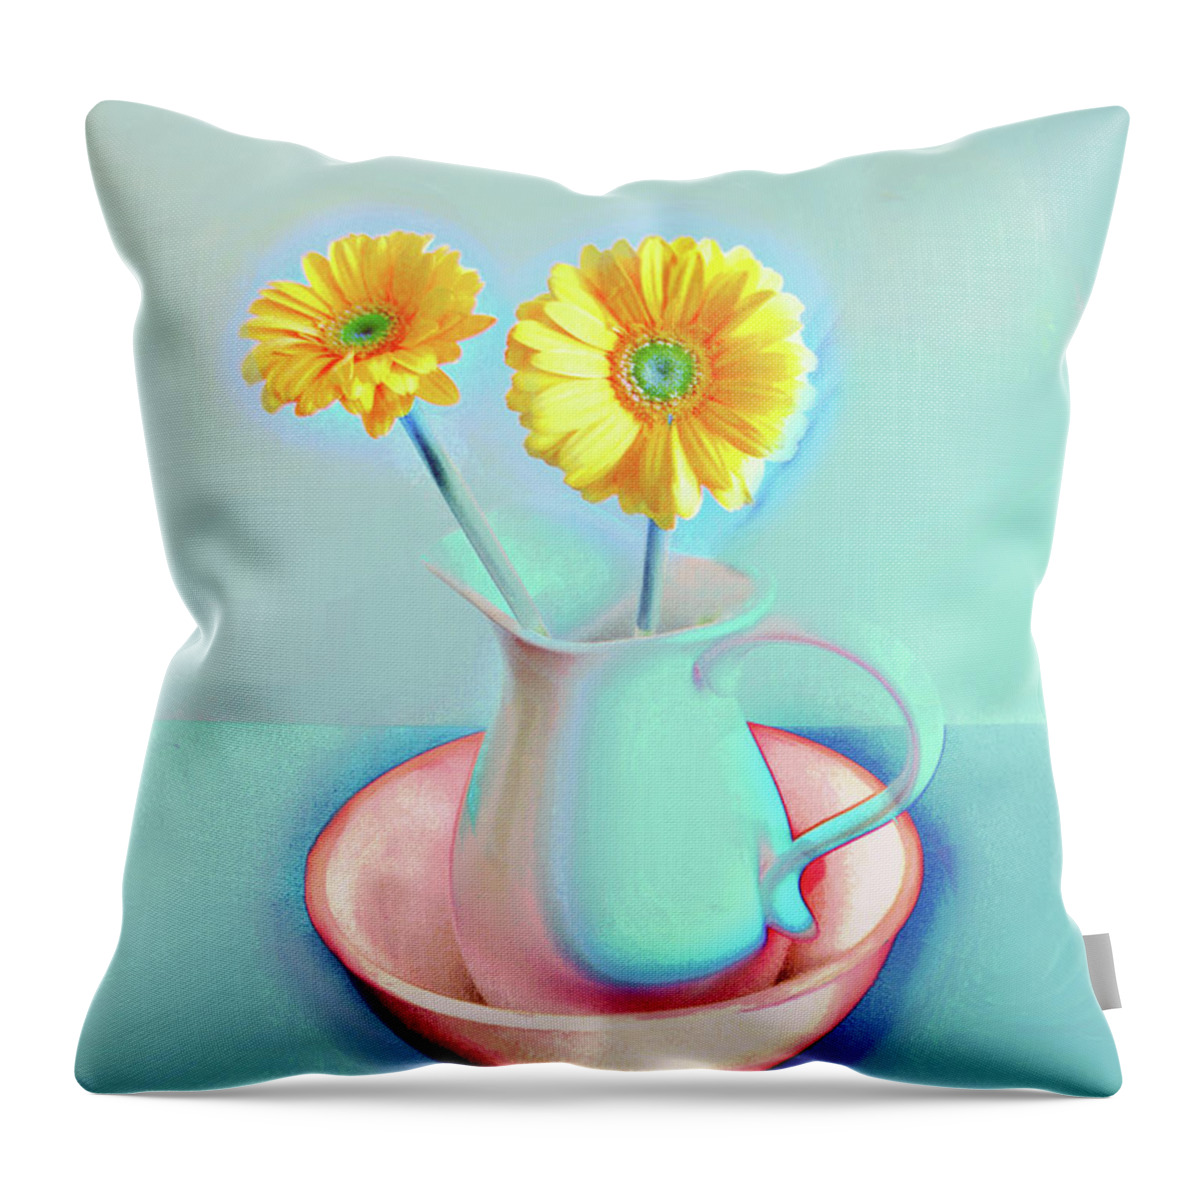 Abstract Art Throw Pillow featuring the digital art Abstract Floral Art 276 by Miss Pet Sitter